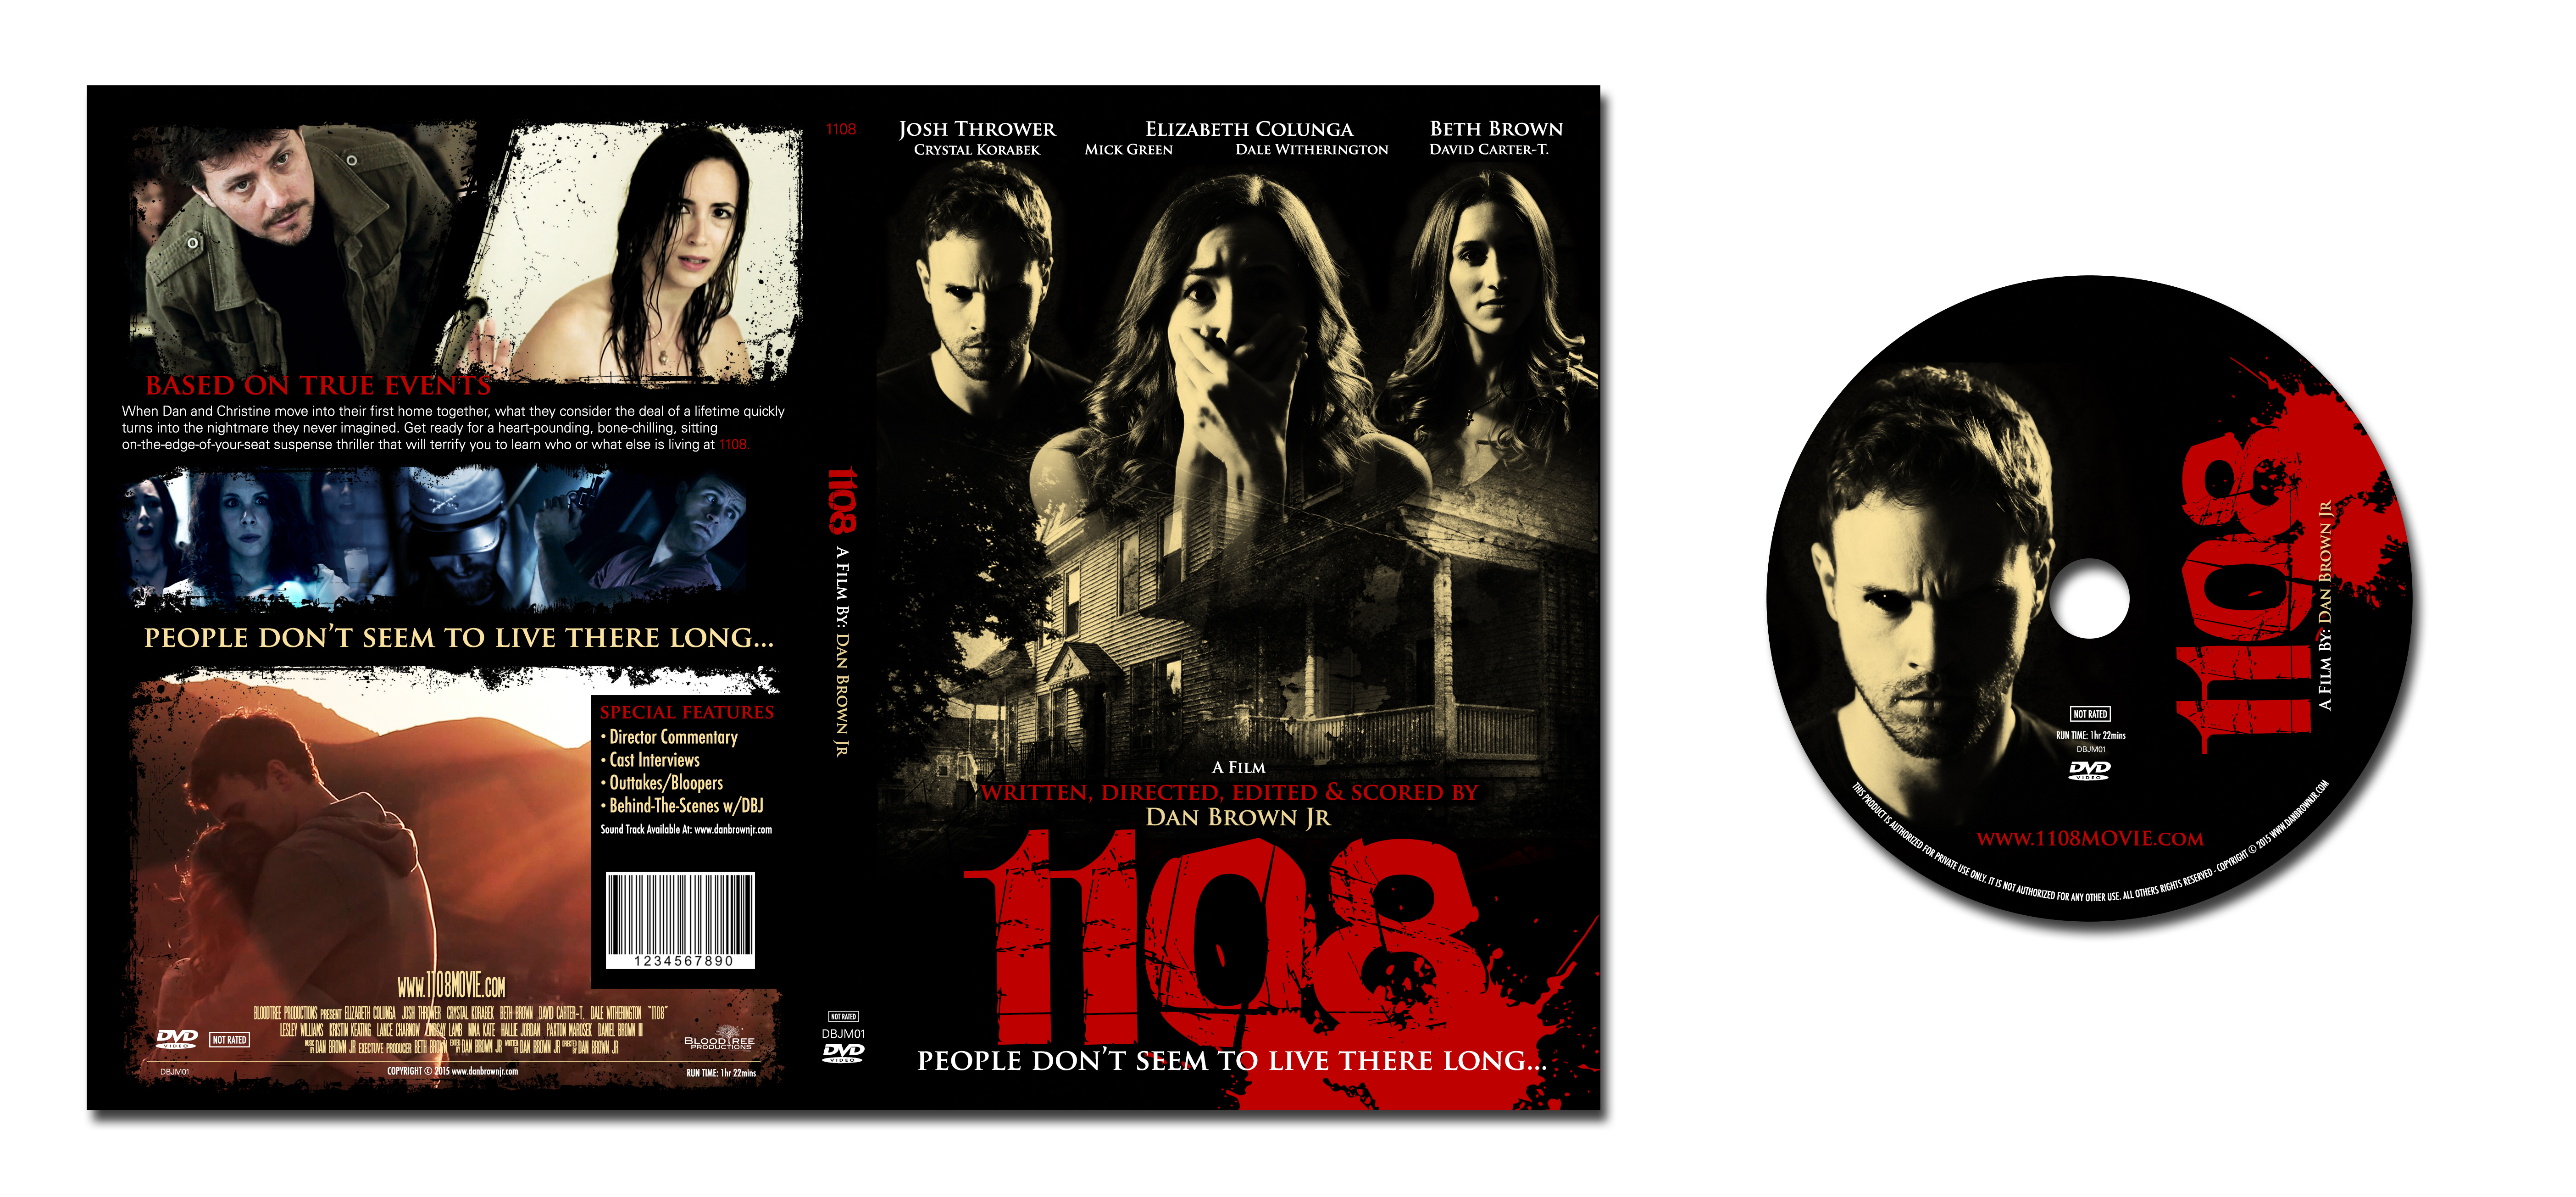 The 1108 DVD Case & Disc Art is Now Complete! – Help Proofread & Join The Rally!